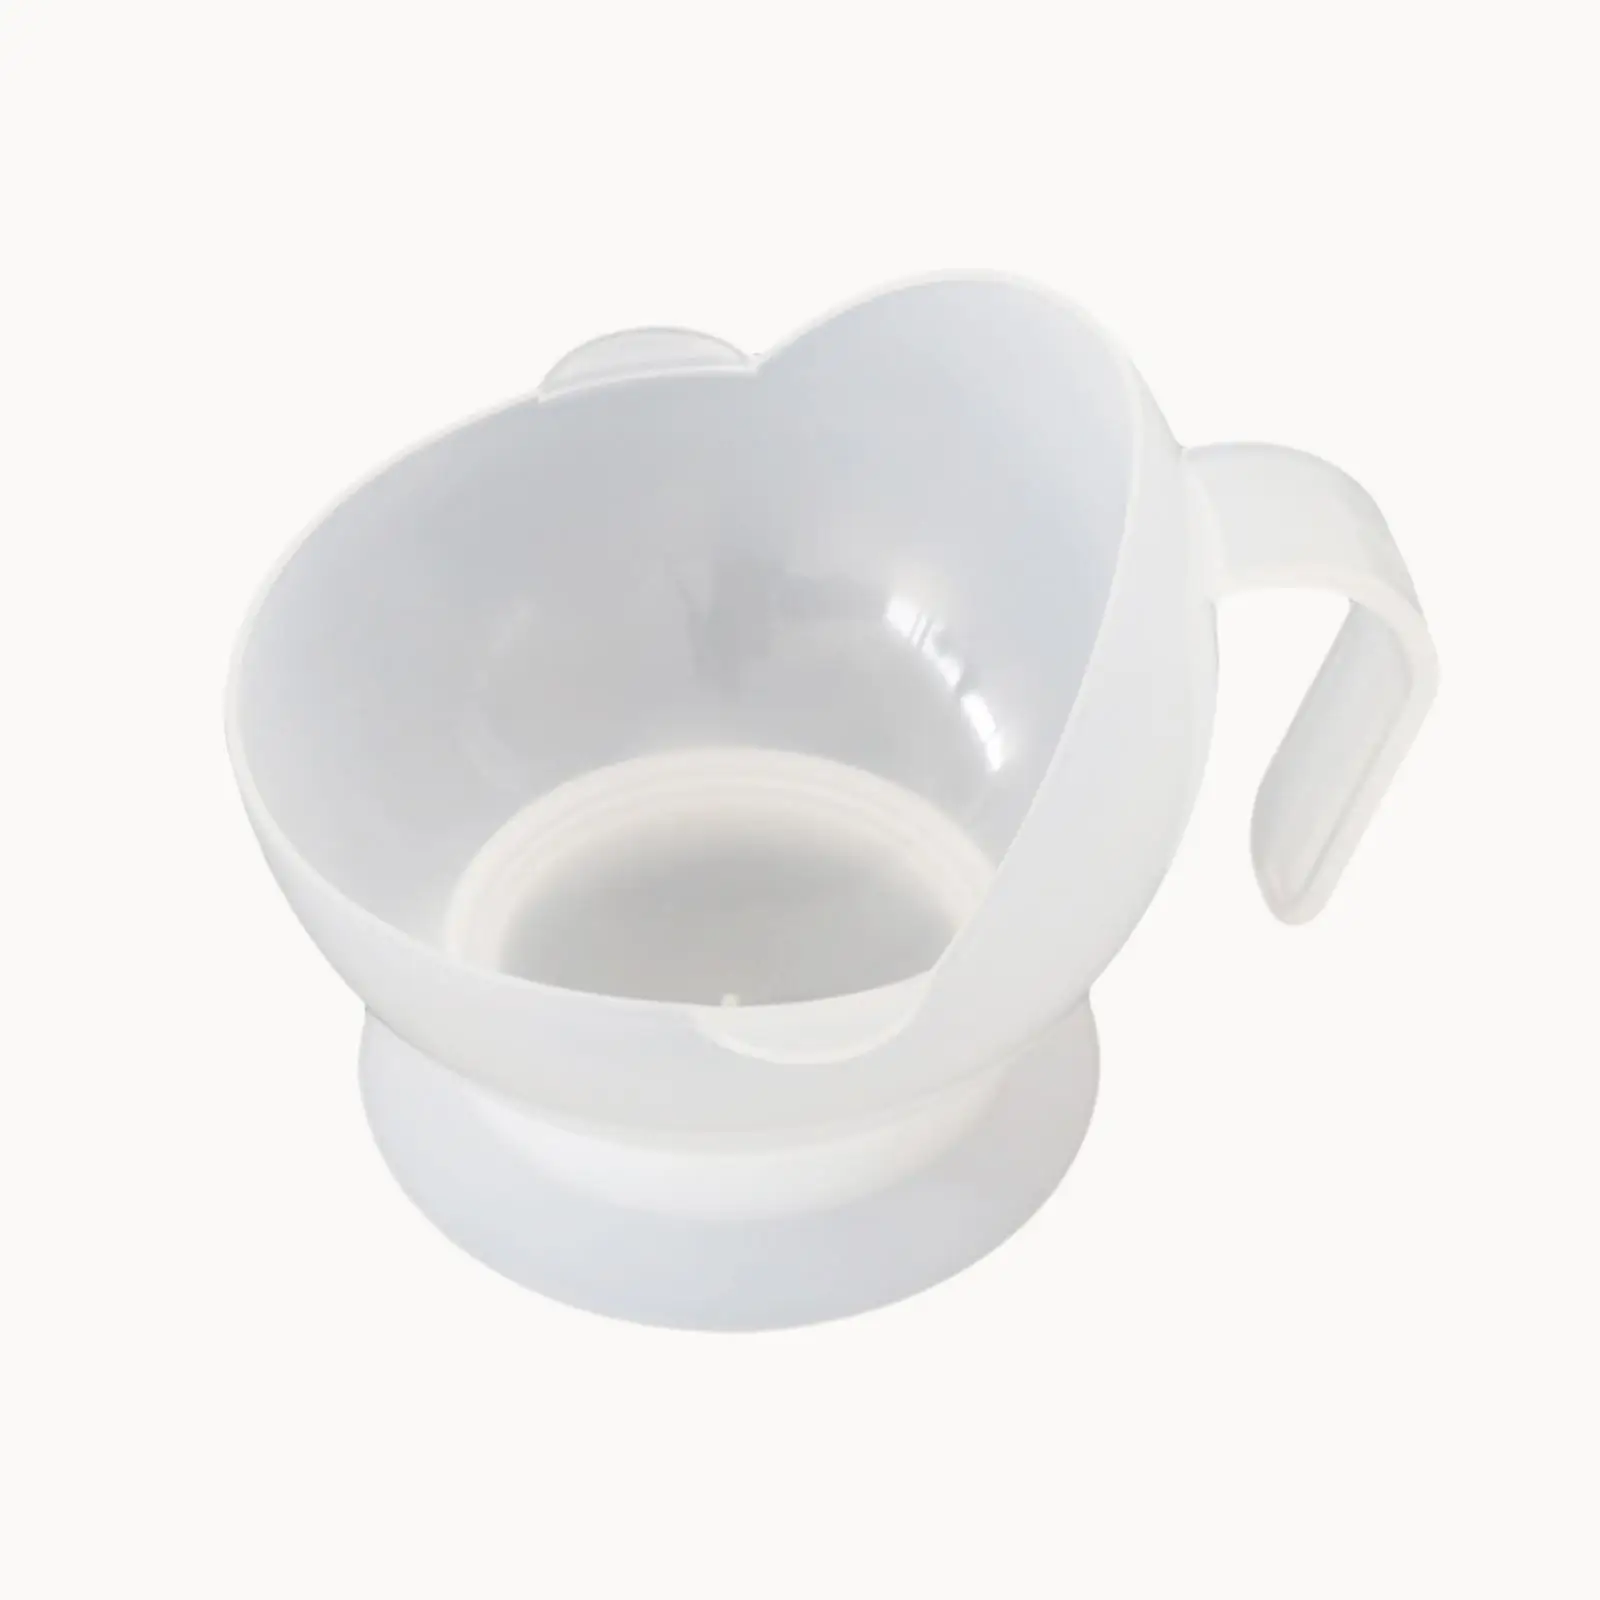 Spill Proof Scoop Bowl Proof Food with Suction Base with Special Needs